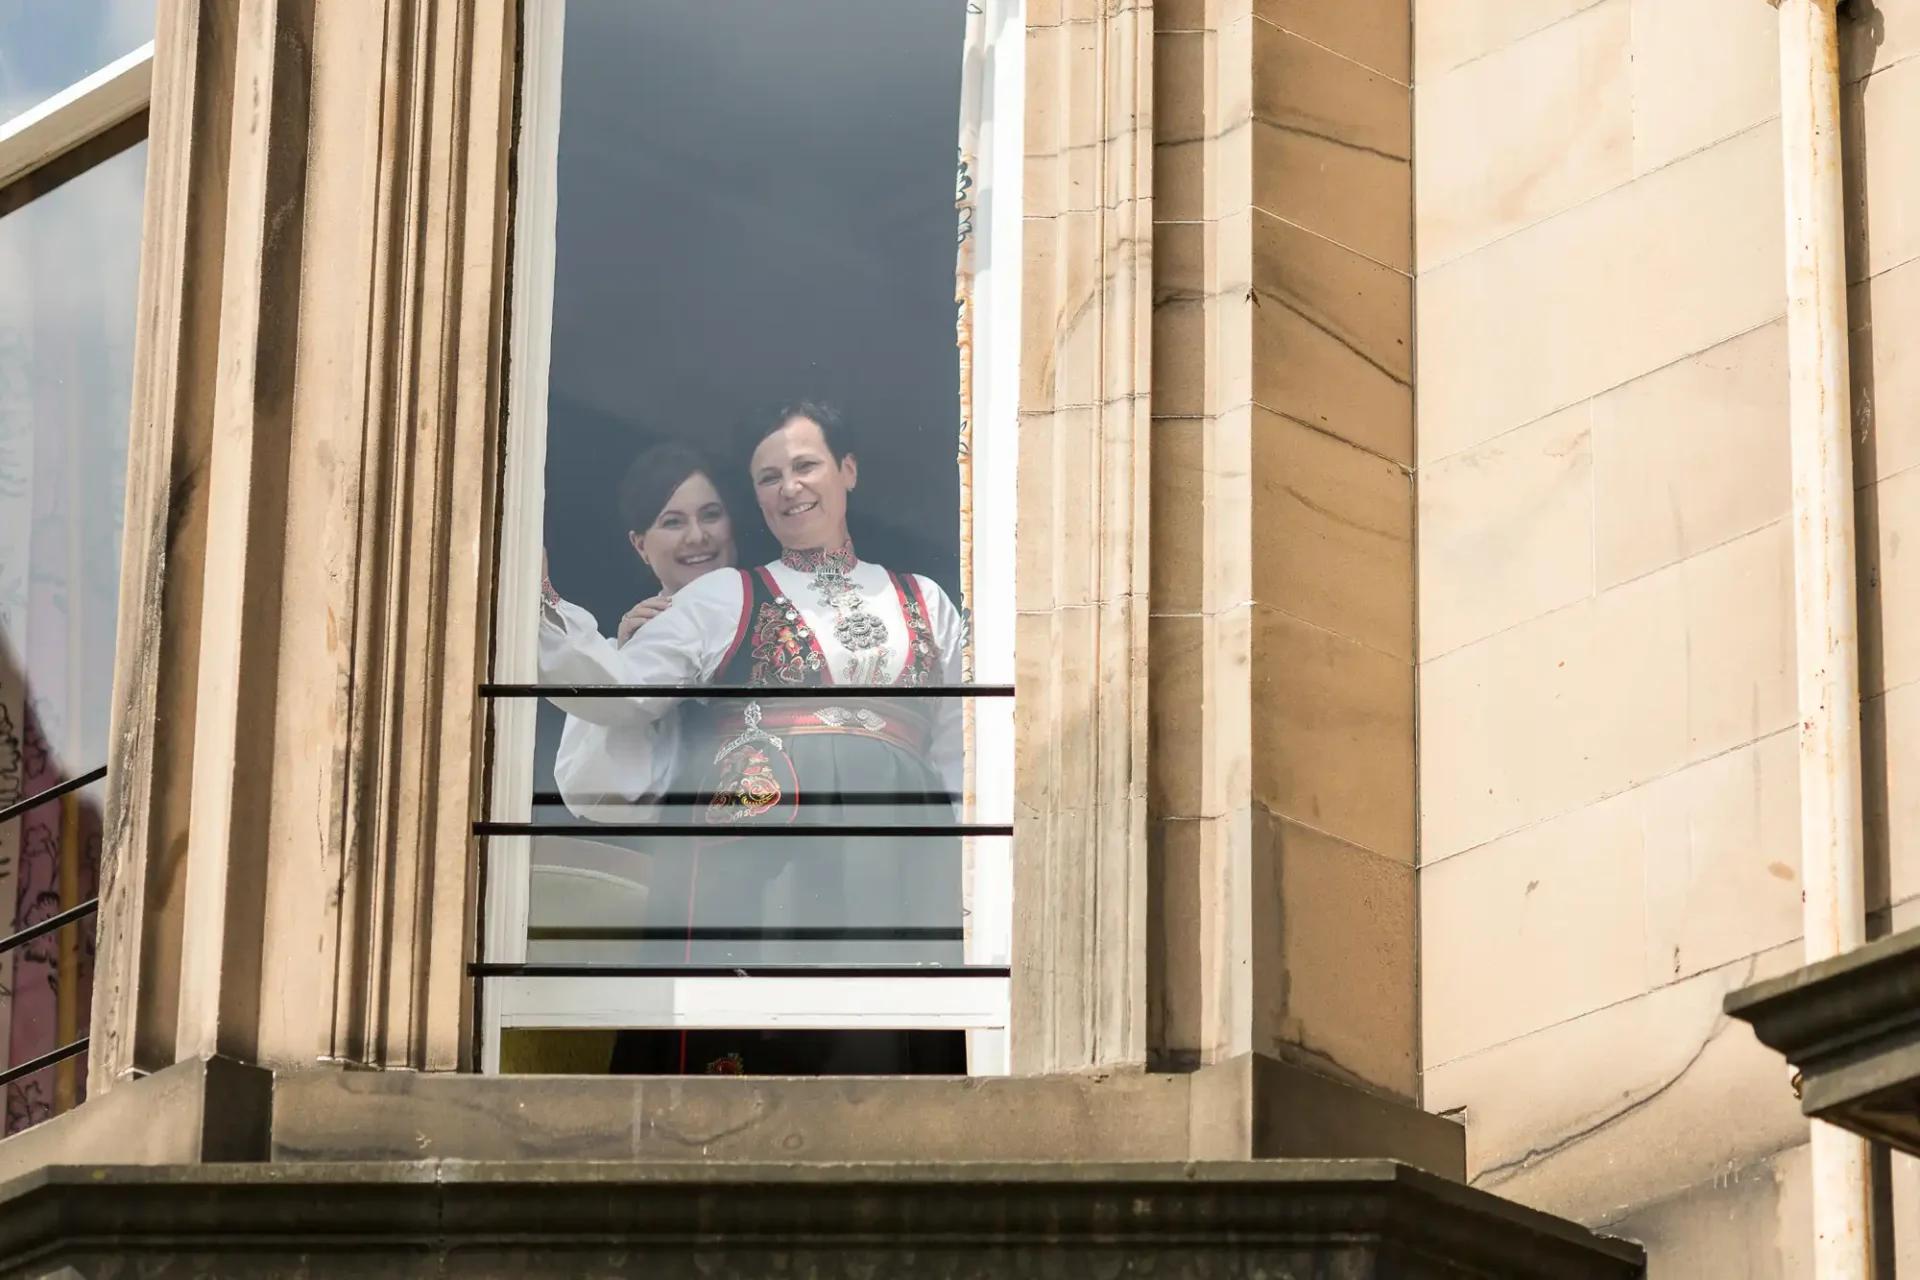 Two women in traditional embroidered dresses smiling and standing behind a balcony railing, viewed from outside a building.